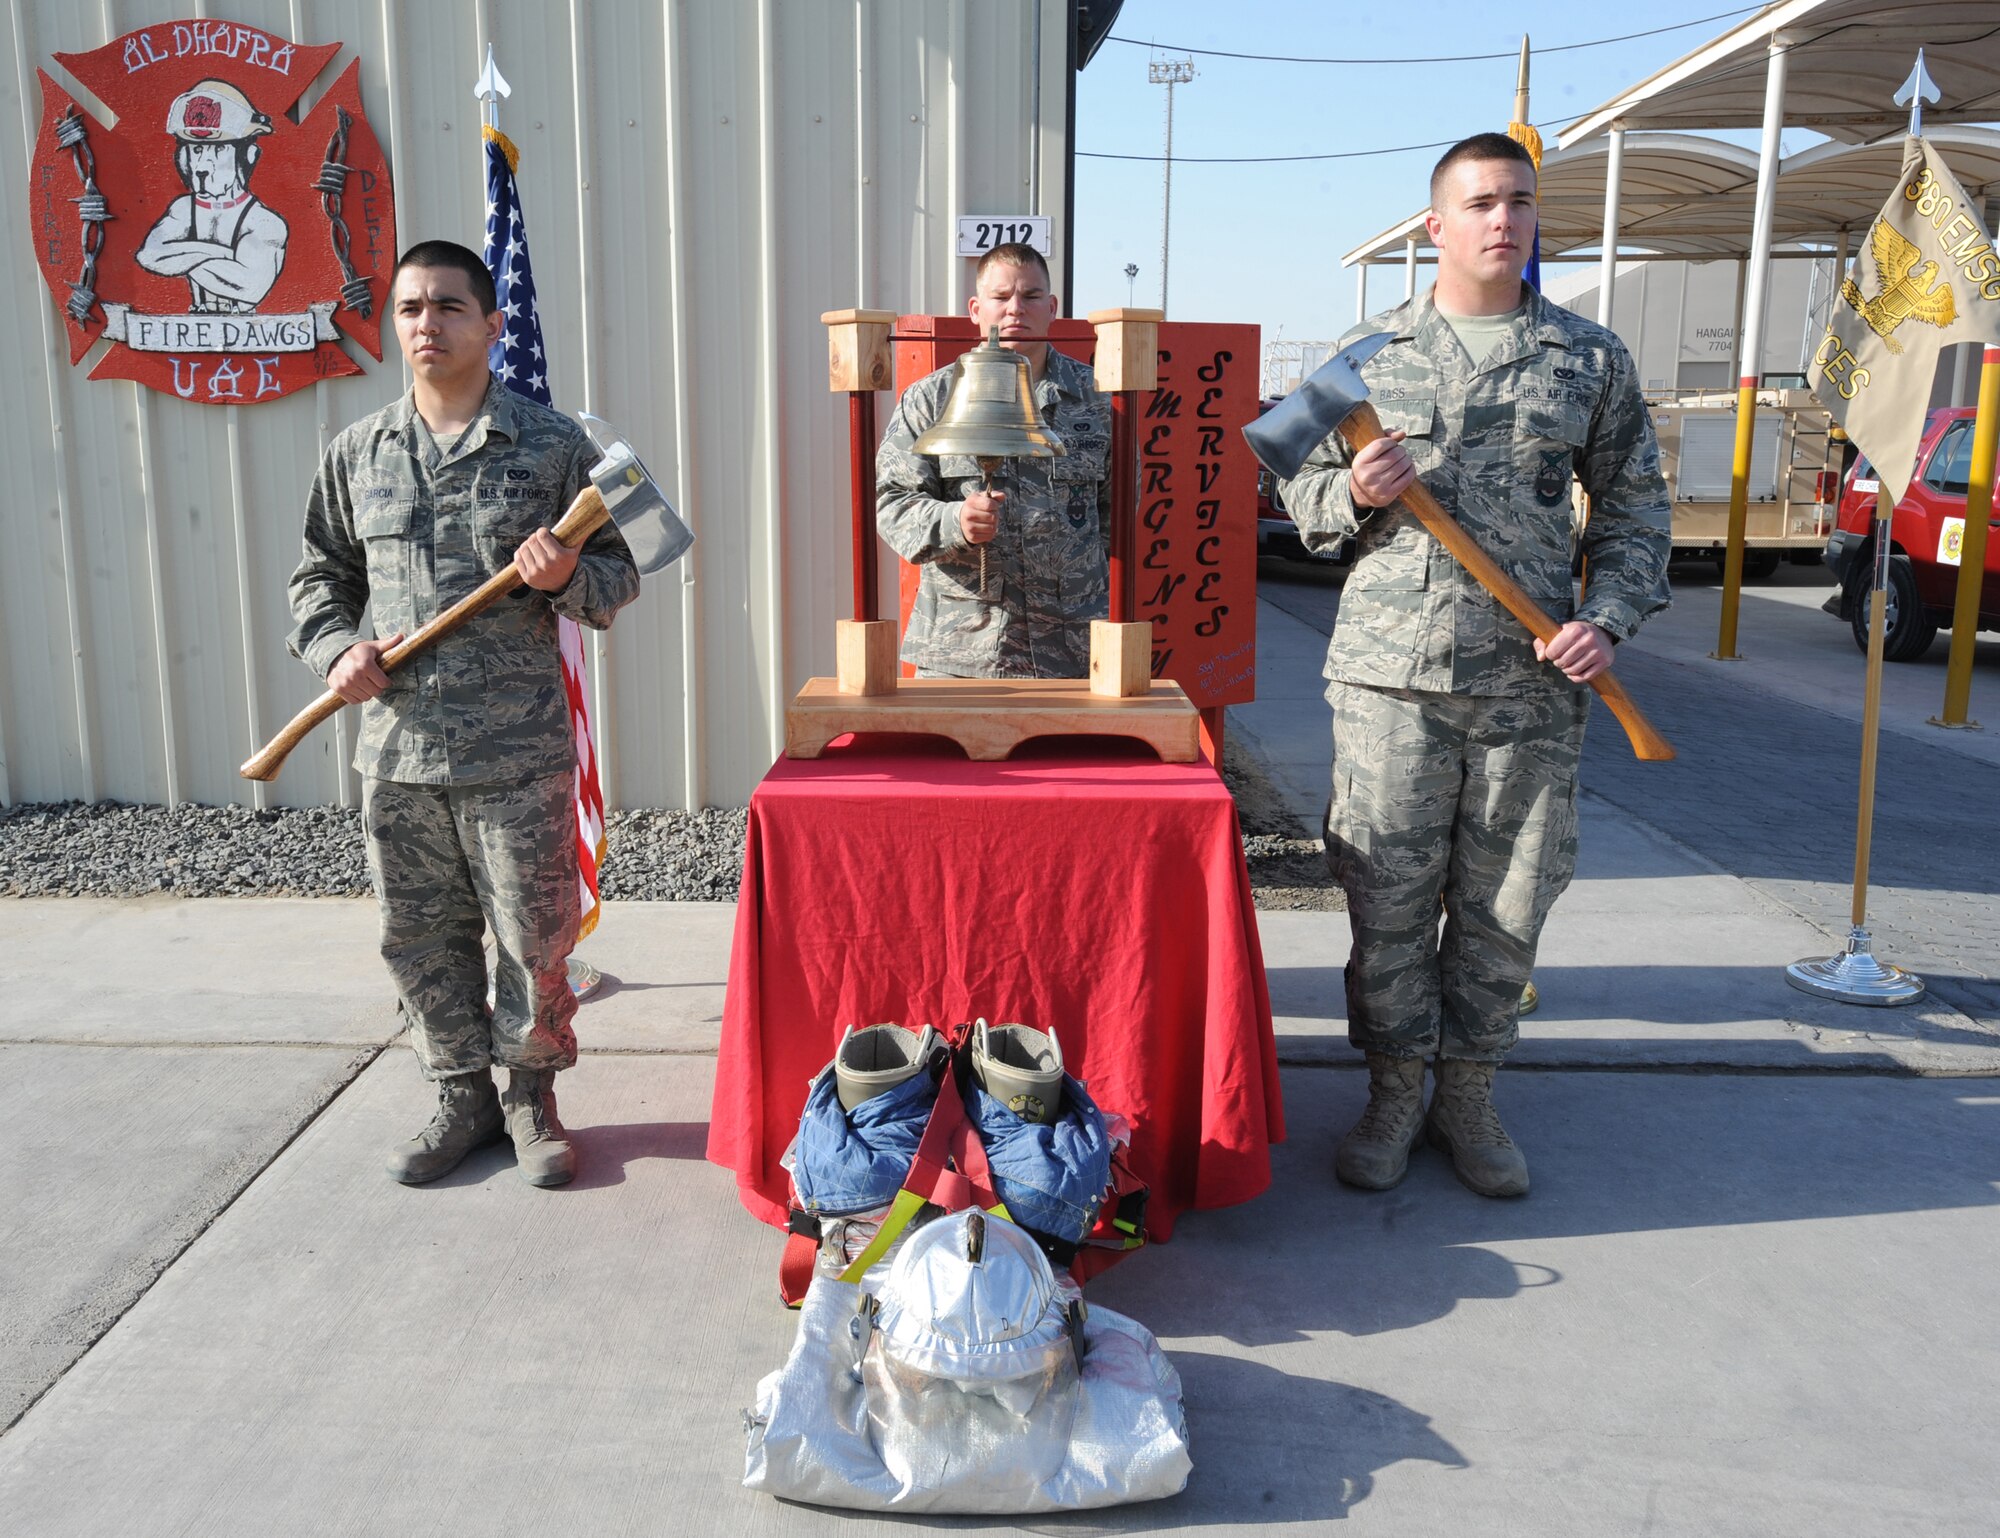 Senior Airman Robert McCallon, 380th Expeditionary Civil Engineer Squadron Fire Department, rings the bell during a "Last Alarm" Memorial Ceremony for Airman 1st Class Derek V. Kozorosky, 18th Civil Engineer Squadron Fire Department, on Feb. 16, 2011, in Southwest Asia. (left to right) Airmen 1st Class Parker Bass and Daniel Garcia, both with the 380th ECES fire department, flank the bell ringer holding axes. Airman Kozorosky passed away while actively engaged in fire protection duties the week prior to the ceremony. (U.S. Air Force photo by Airman 1st Class Maynelinne De La Cruz)